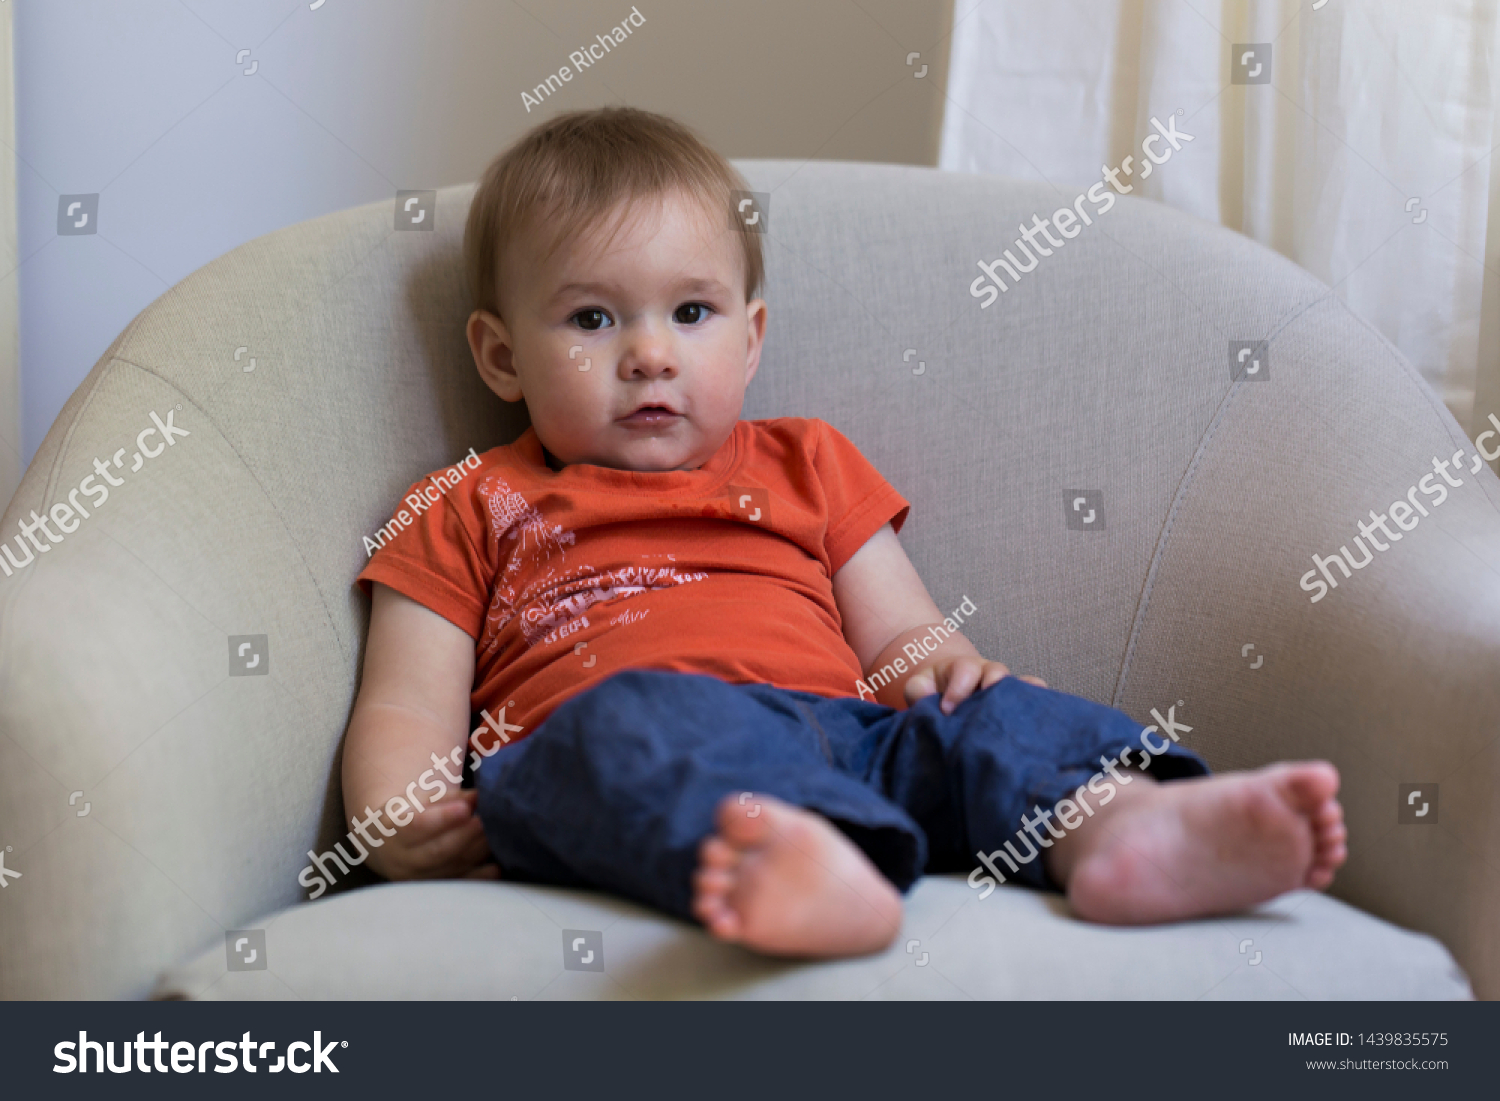 Horizontal full length portrait of cute fair toddler girl in orange shirt and blue pants lounging in armchair with adorable innocent expression #1439835575